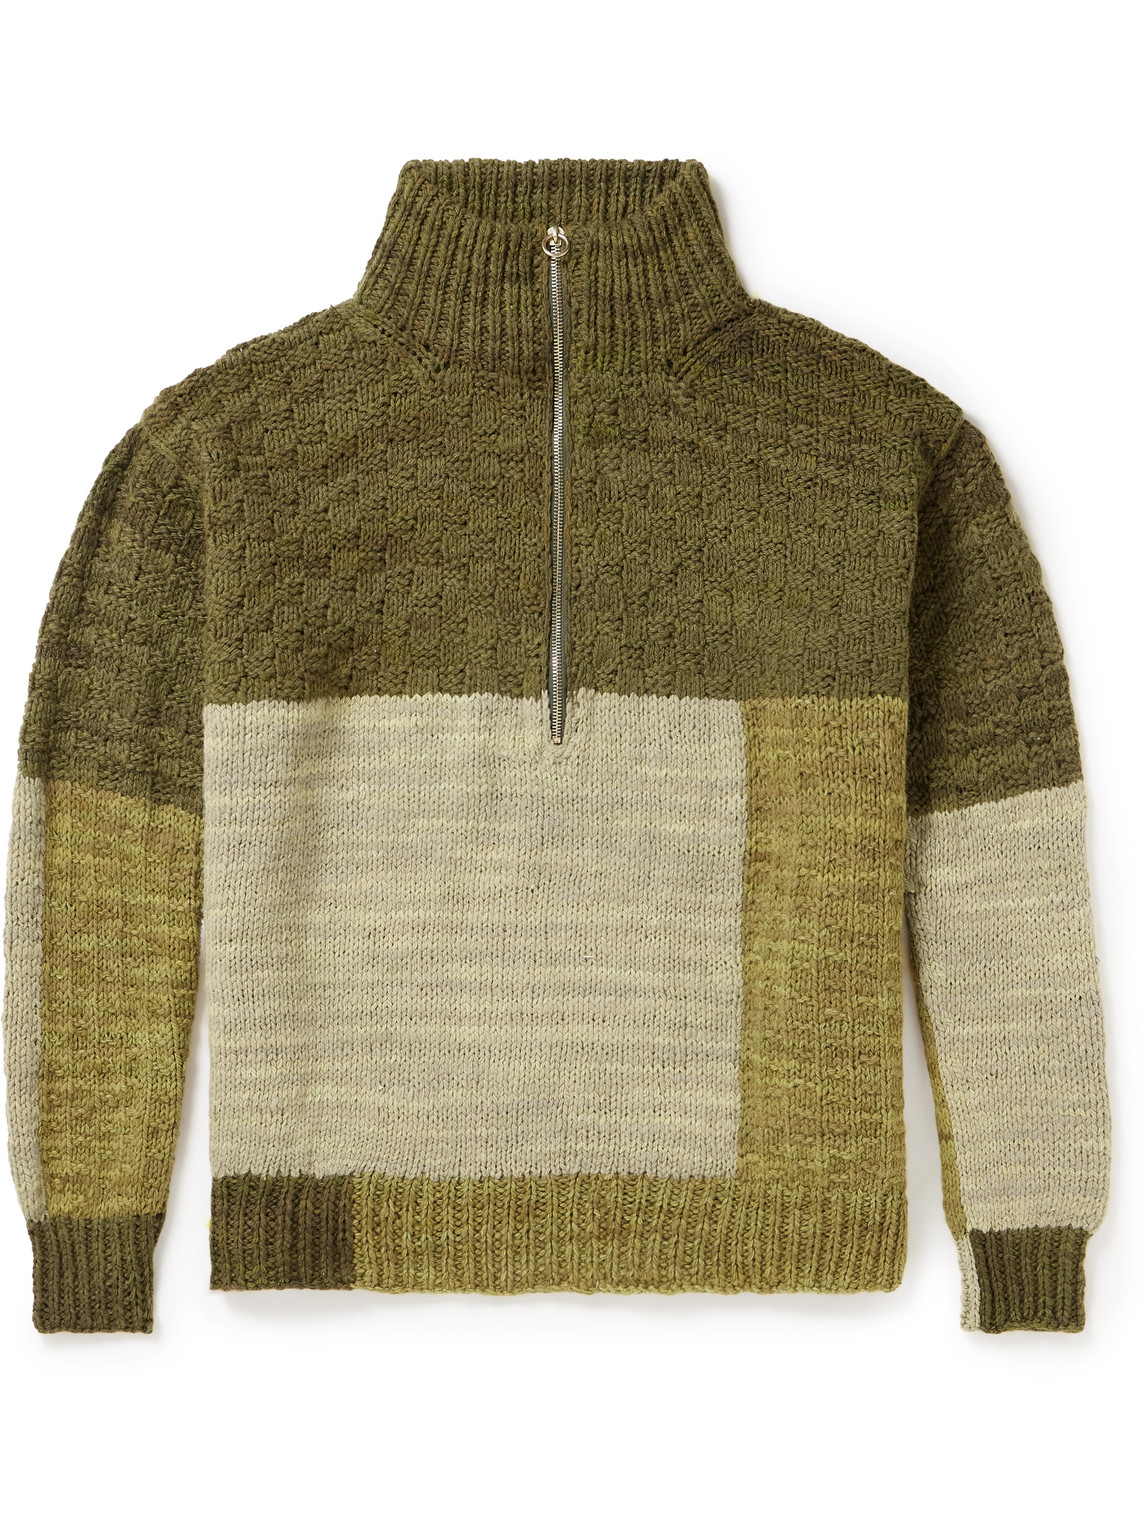 Throwing Fits Patchwork Knitted Half-Zip Sweater